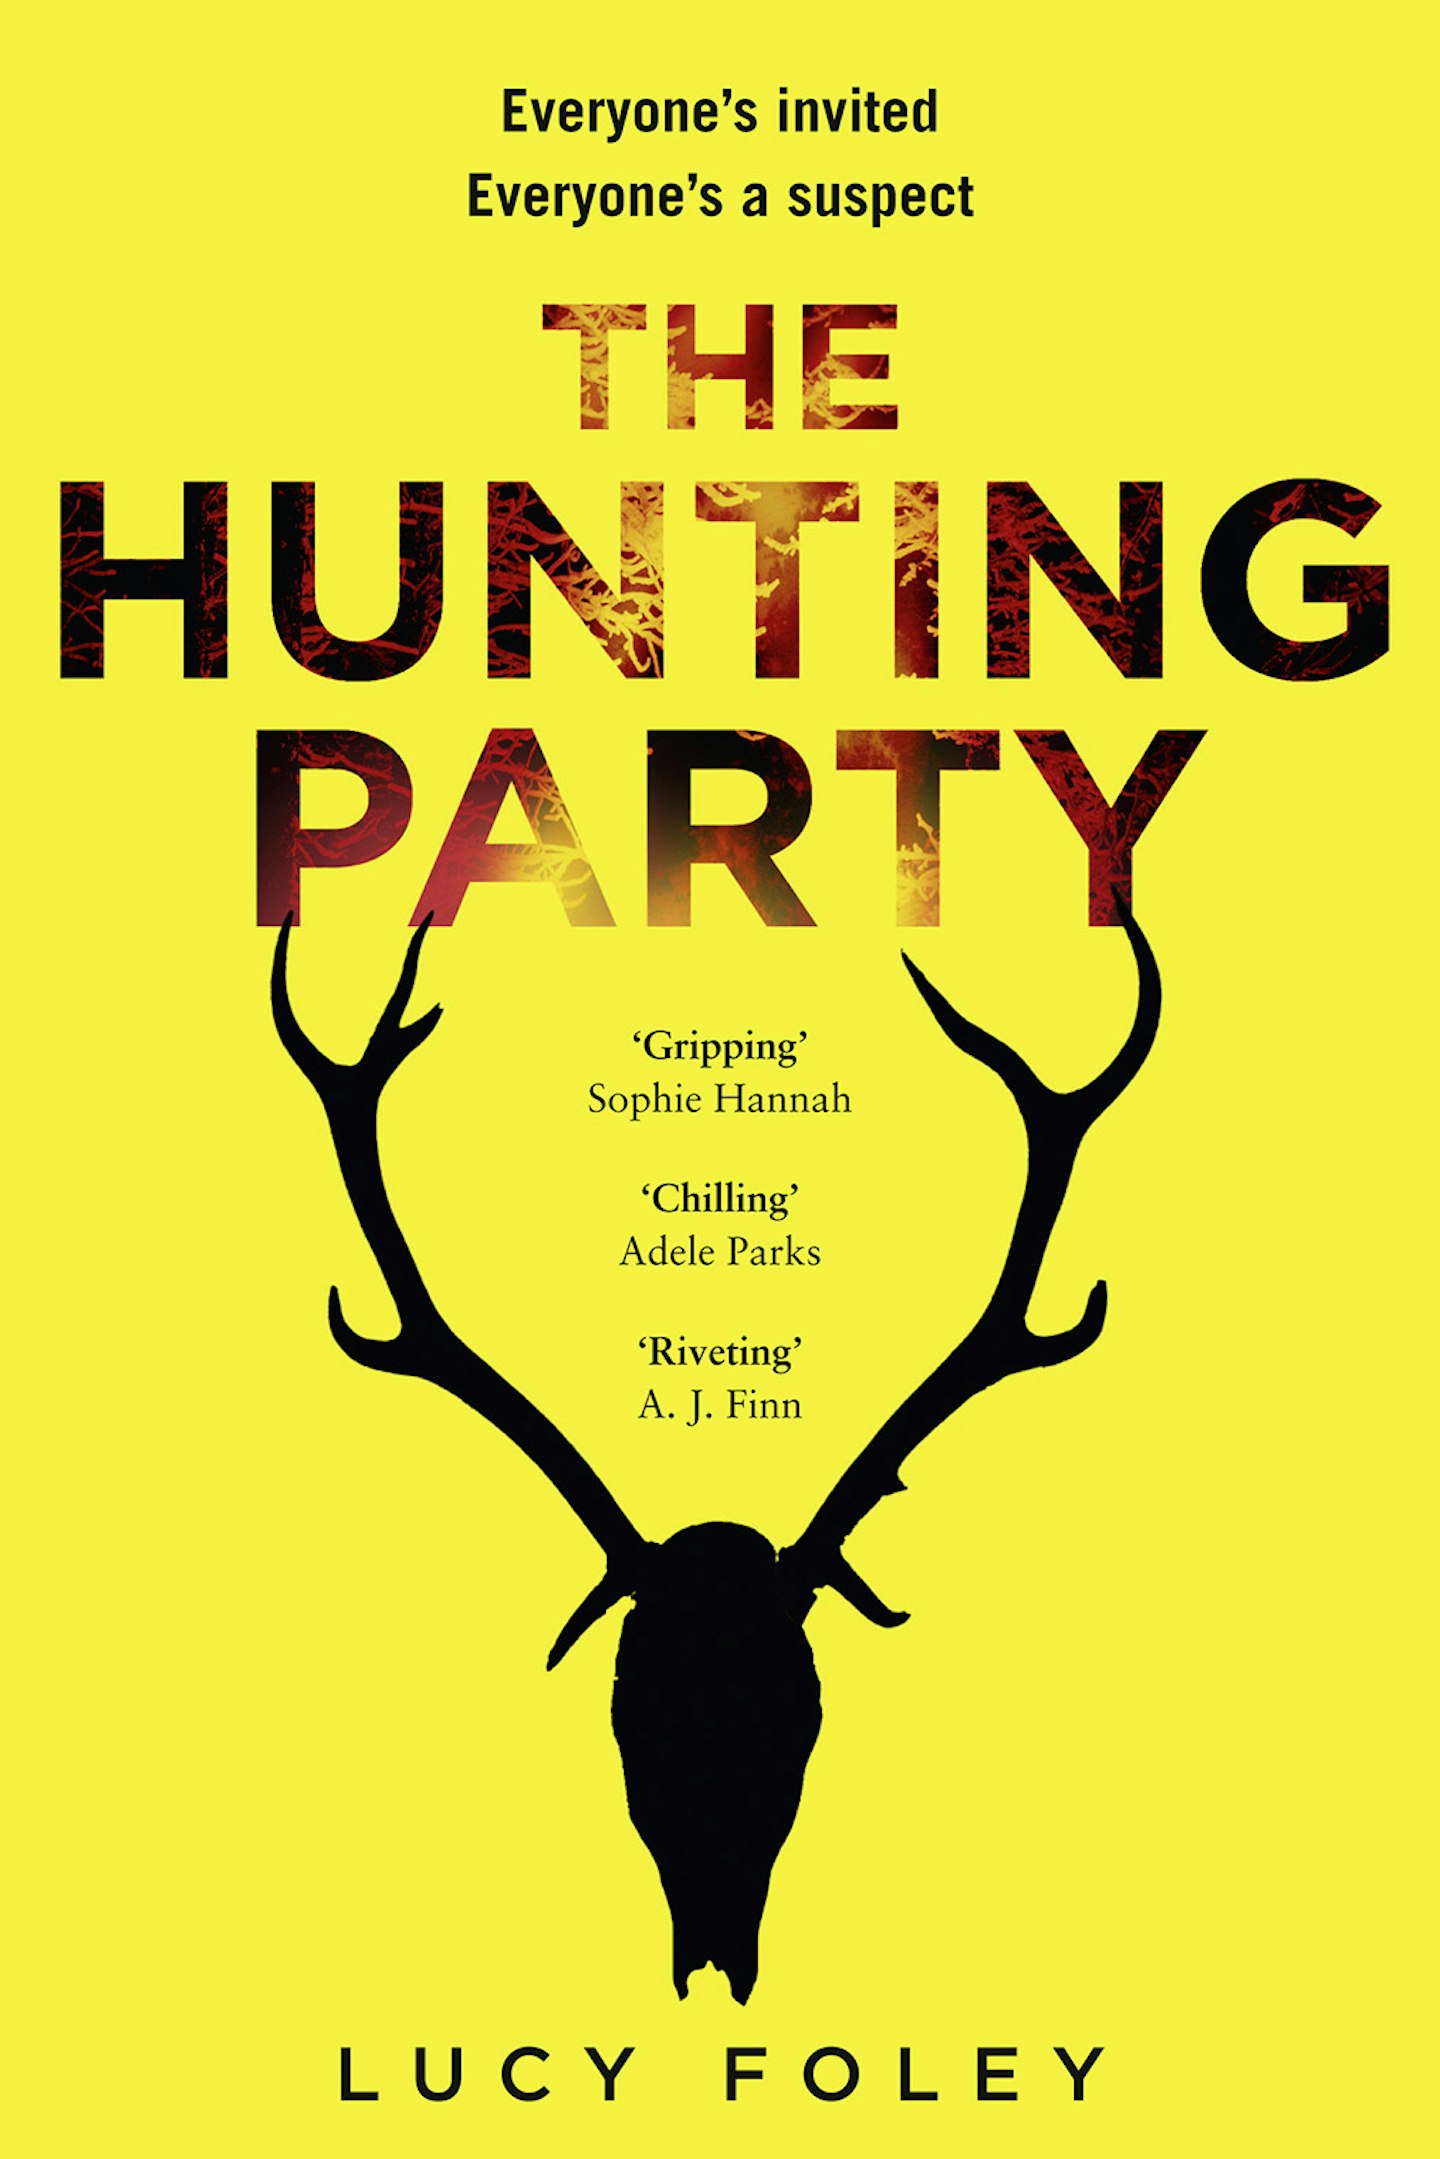 The Hunting Party - Lucy Foley (HarperCollins)